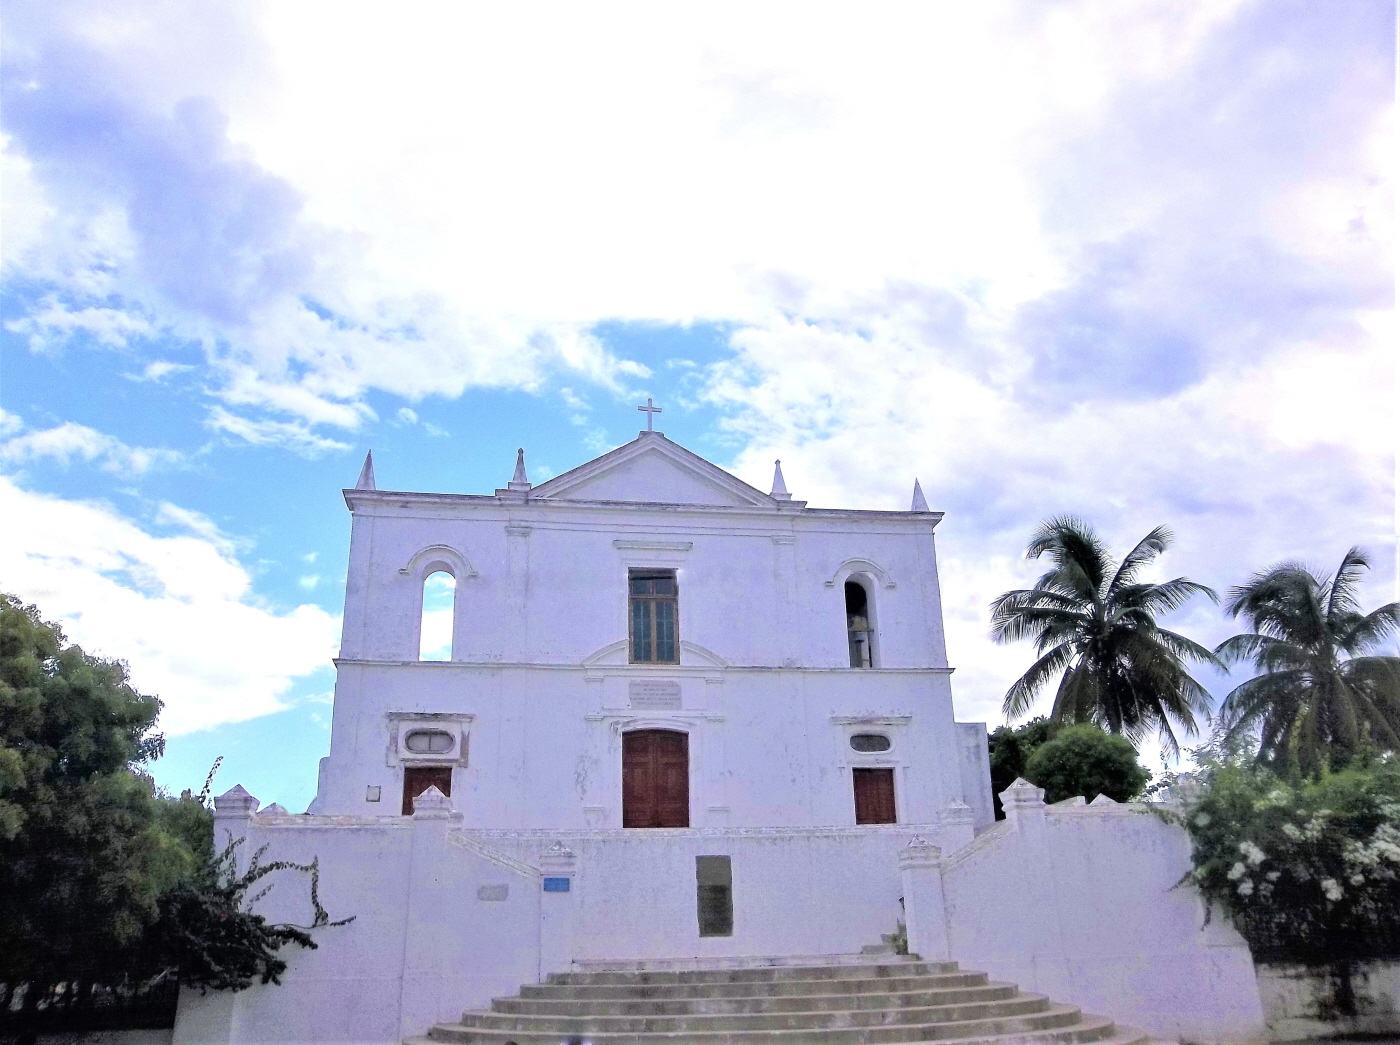 Our Lady of Health  Church - Mozambique Island  is a UNESCO World Heritage Site